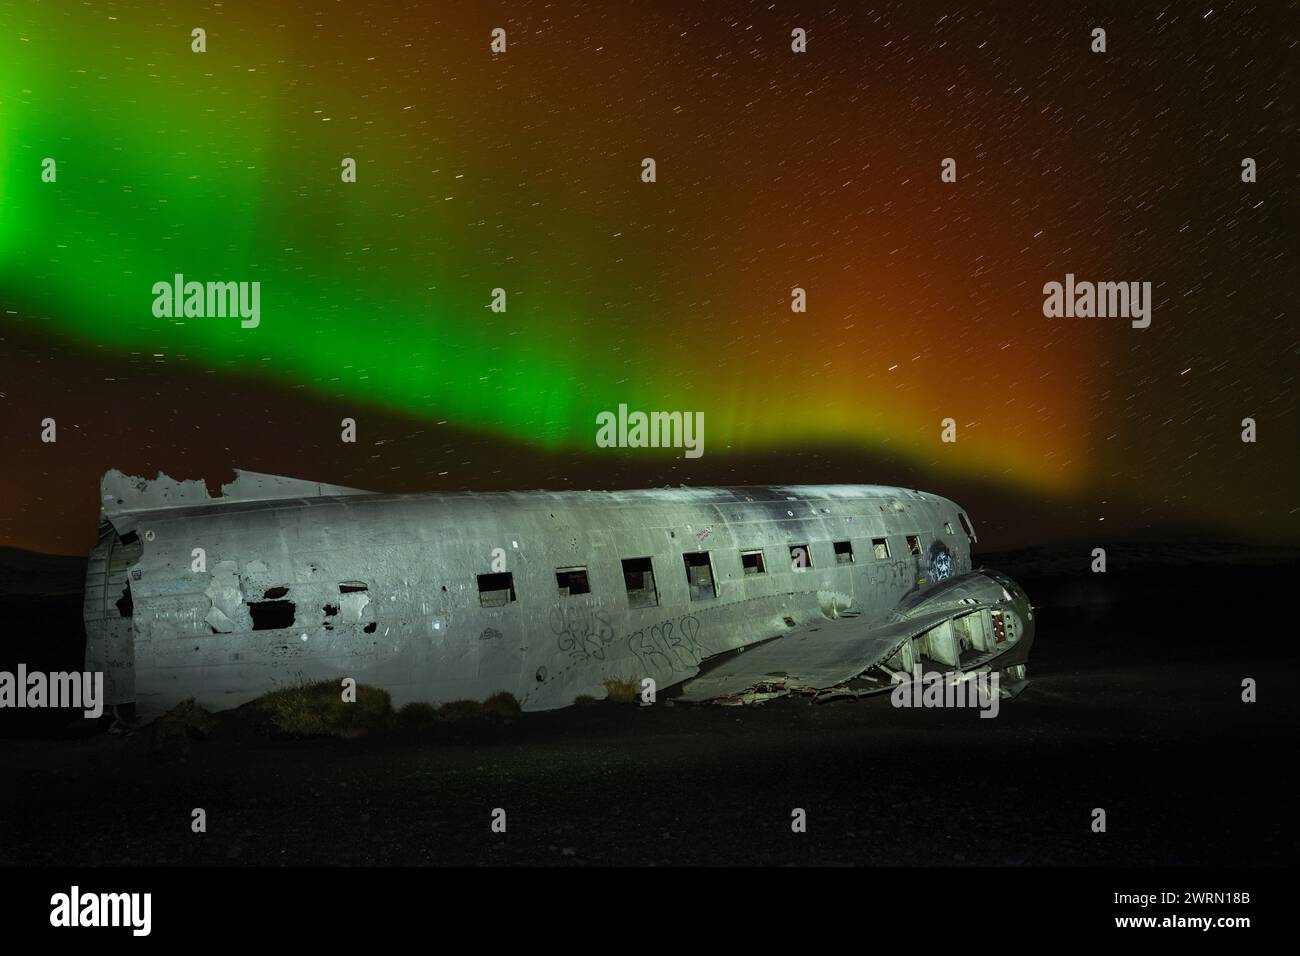 A crashed DC-3 aircraft under the Northern Lights Aurora Borealis in Iceland, Polar Regions Copyright: SpencerxClark 1320-268 Stock Photo